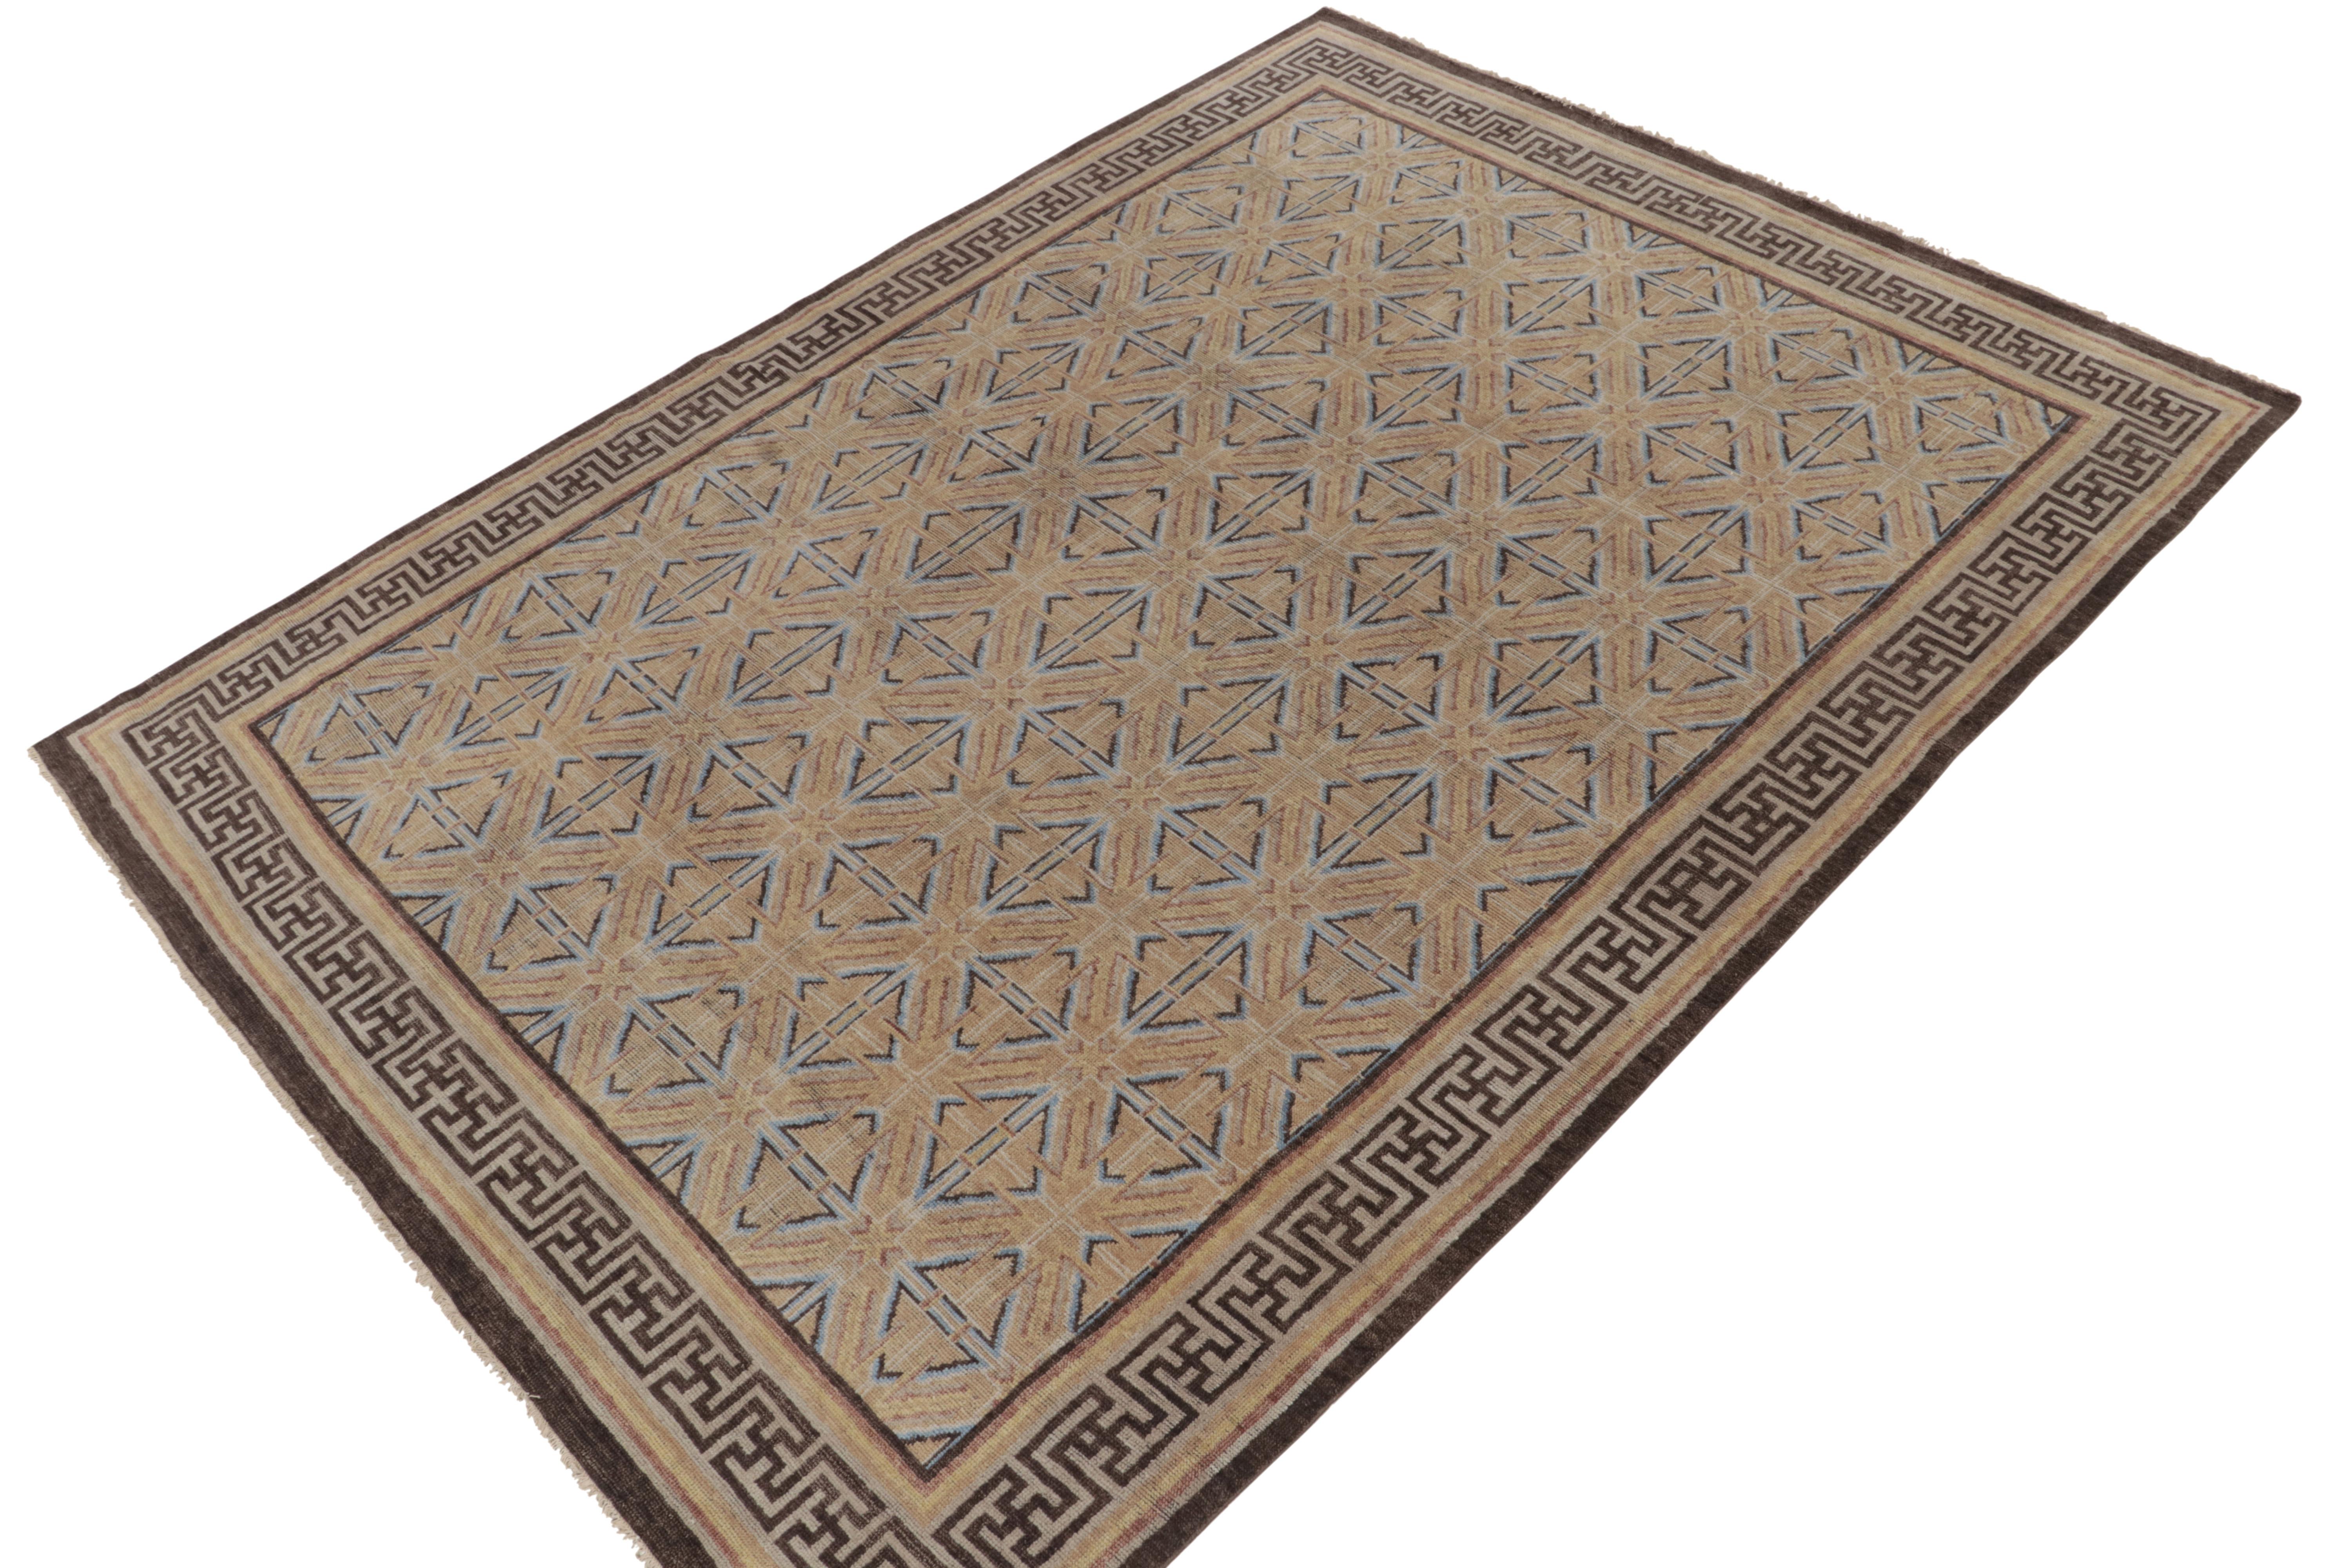 Hand-knotted in the softest quality wool, this 9x12 rug joins the classic styles of our Burano collection. Particularly inspired by the 18th century Chinese dynastic pieces, the deco style diamond pattern rejoices in a muted blue and gold on